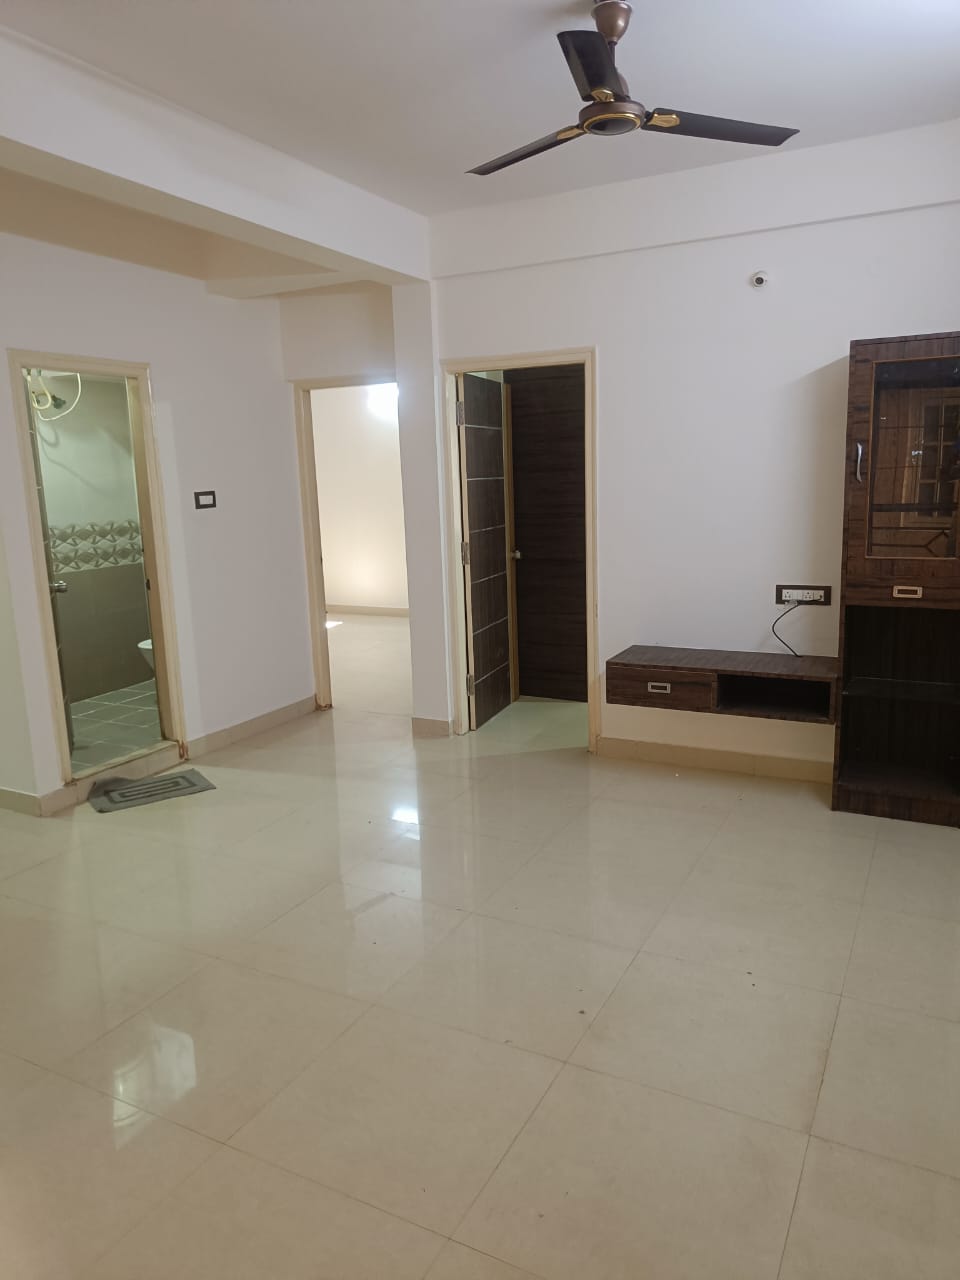 3 BHK Independent House for Lease Only at JAML2 - 2161 in Thubarahalli